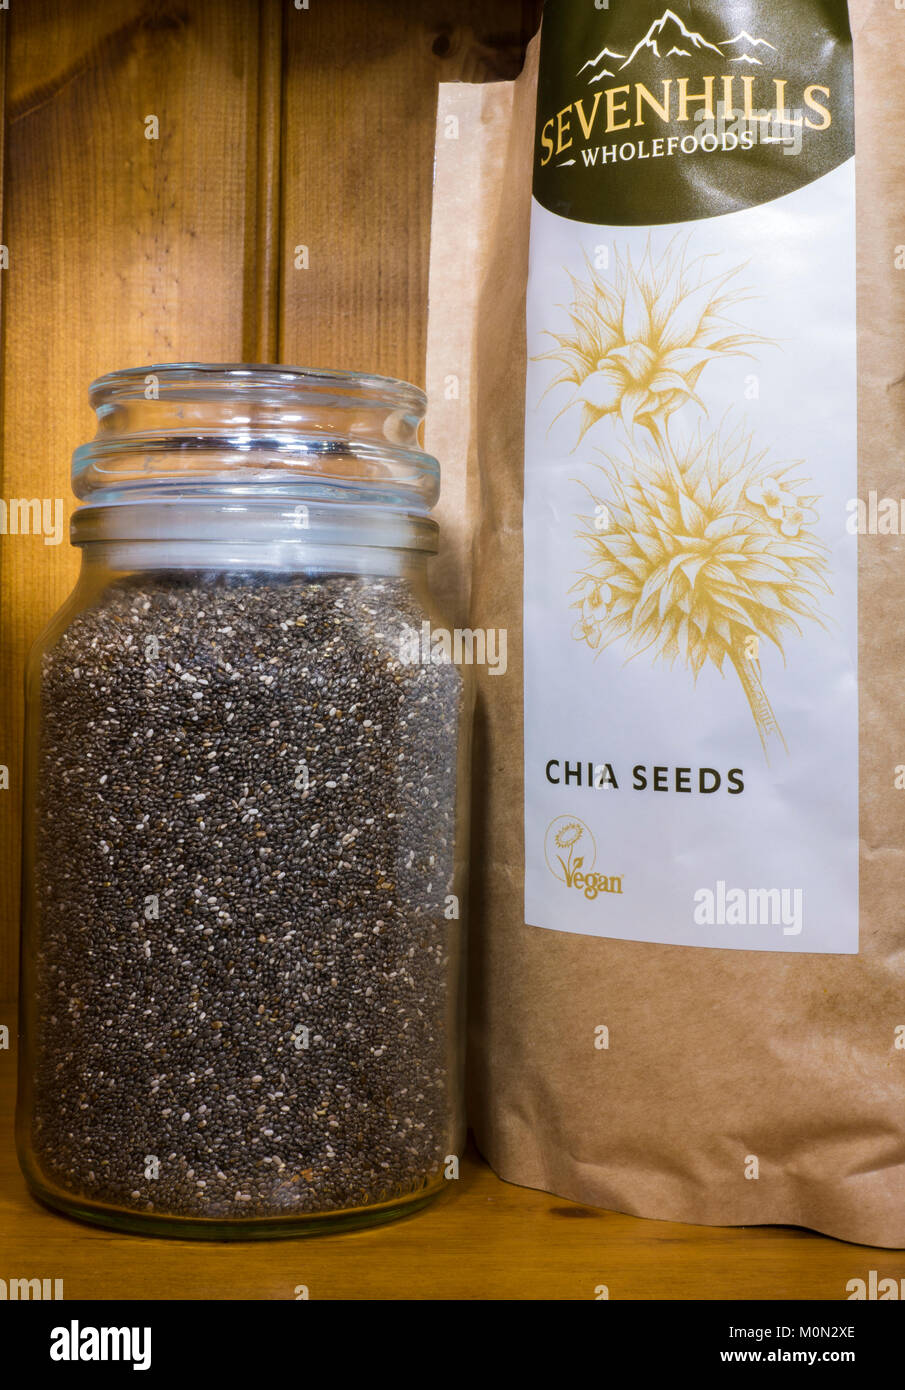 Chia seeds (salvia hispanica). Organic, uncooked, high in protein, vegan, superfood. In a packet and glass container on a shelf in a pine cupboard. Stock Photo